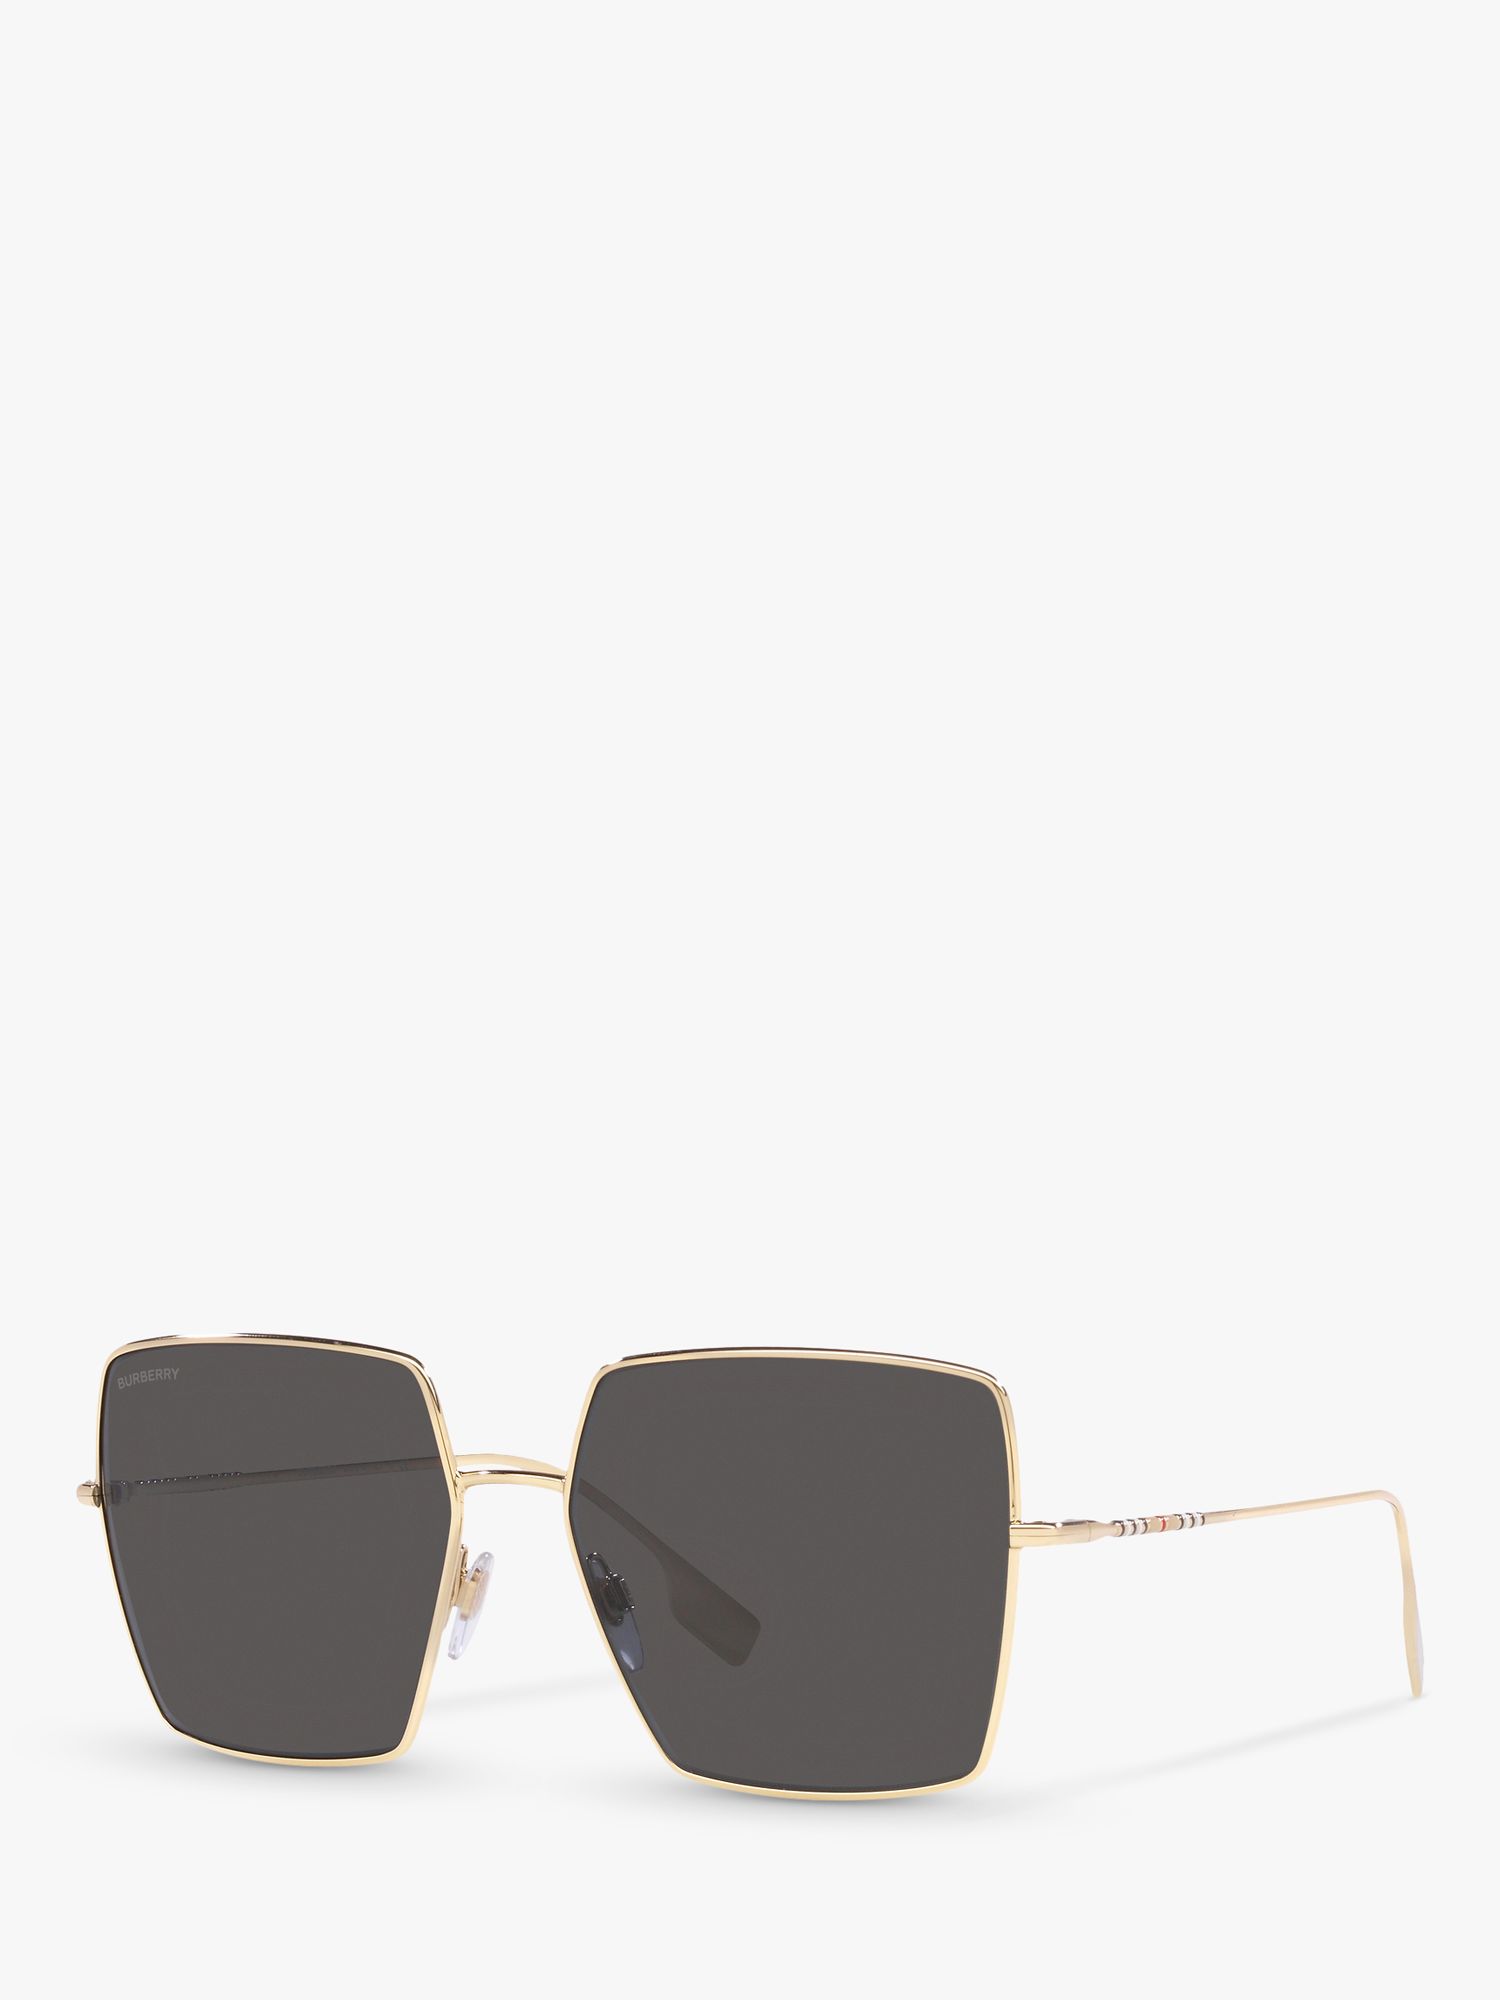 Burberry BE3133 Women's Daphne Square Sunglasses, Gold/Grey at John Lewis &  Partners